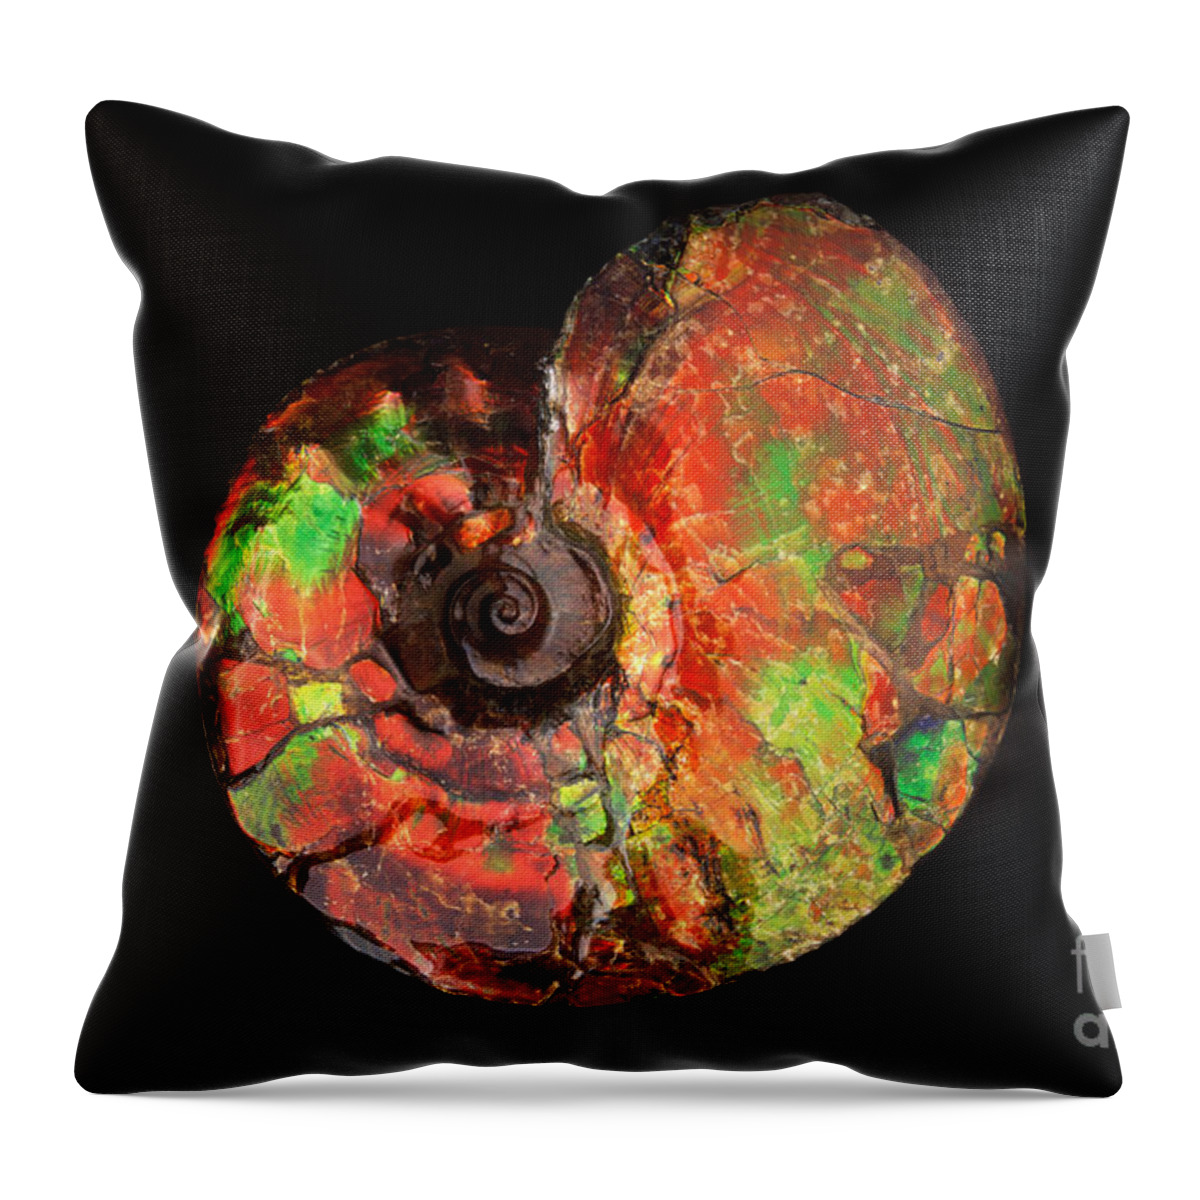 Ammonite Throw Pillow featuring the photograph Ammonite Fossil by Francois Gohier and Photo Researchers